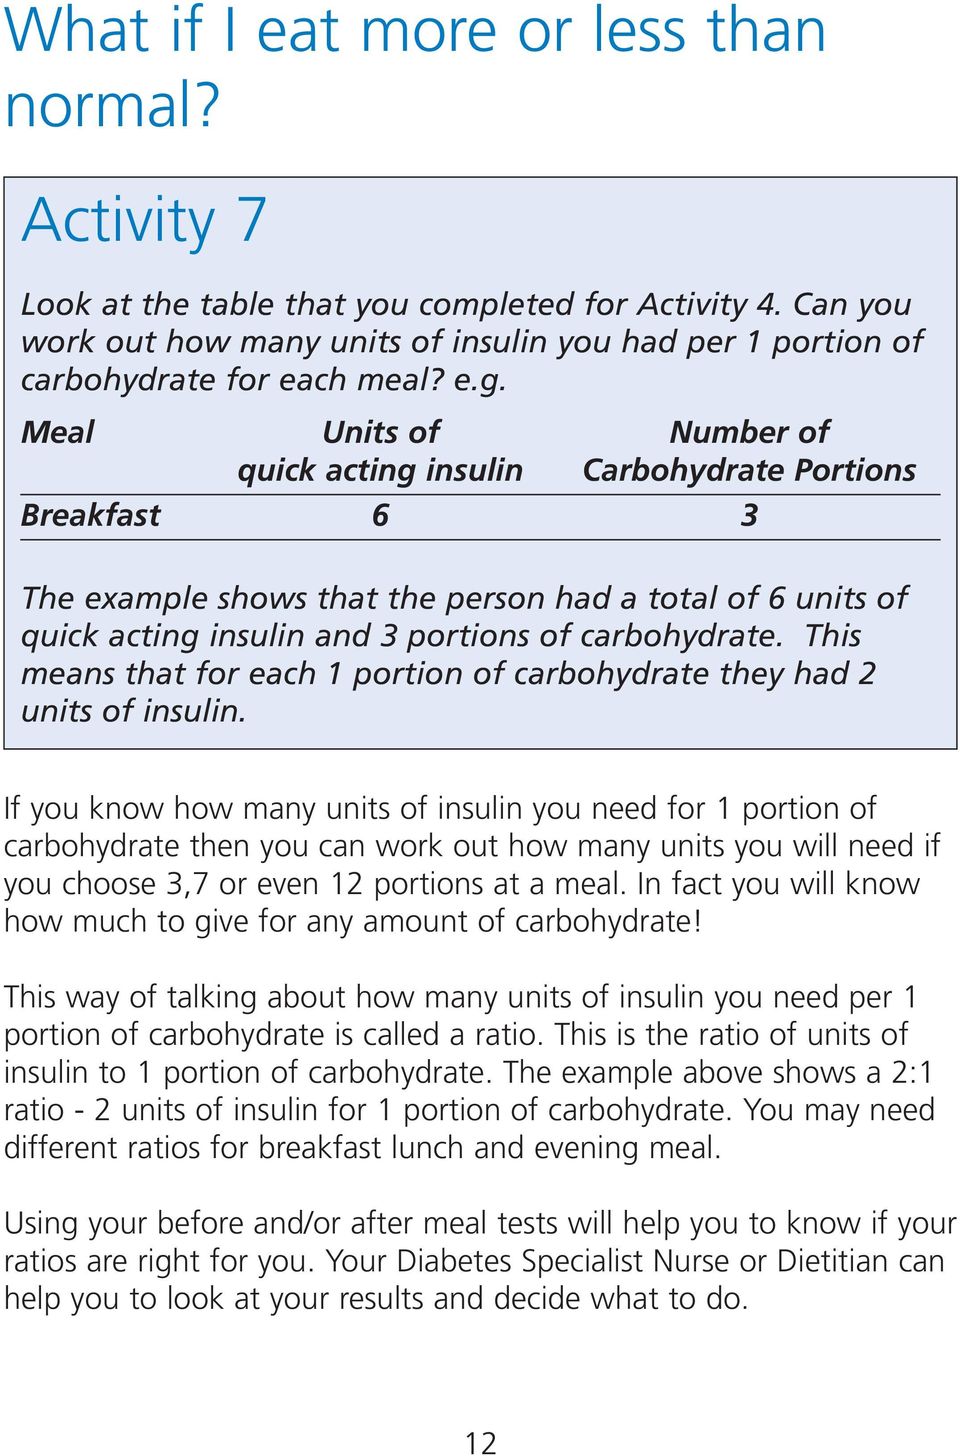 This means that for each 1 portion of carbohydrate they had 2 units of insulin.